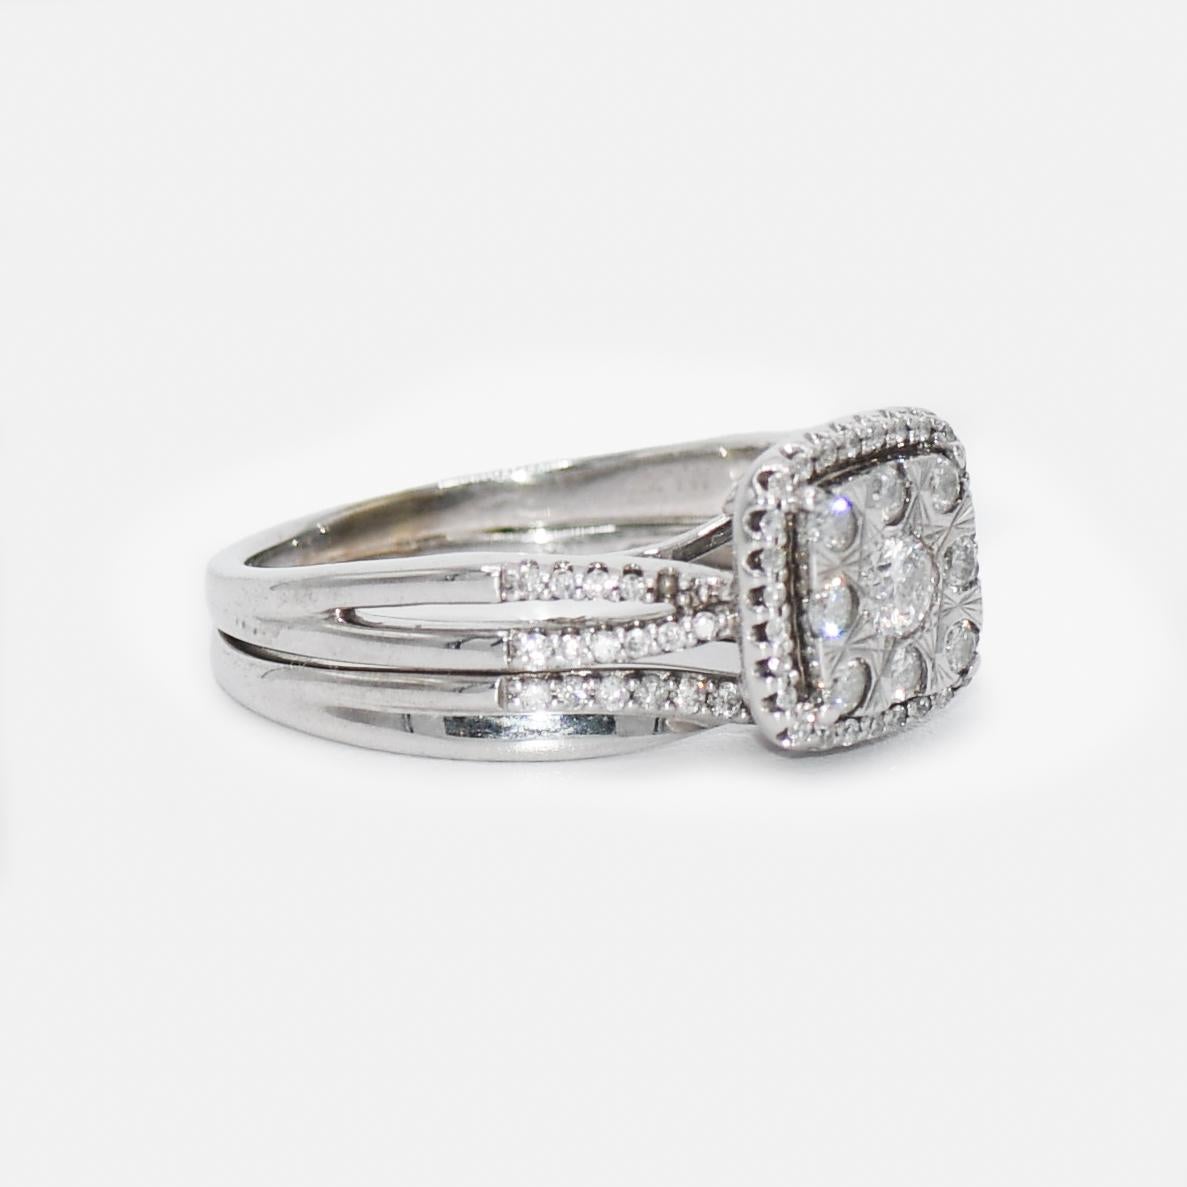 10k White Gold Diamond Ring 0.40tdw, 5.5g
Ladies diamond cocktail ring with 10k white gold setting.
Stamped 10k and weighs 5.5 grams. 
The diamonds are round brilliant cuts, approximately .40 total carats, i to j color, Si to i1 clarity.
Ring size